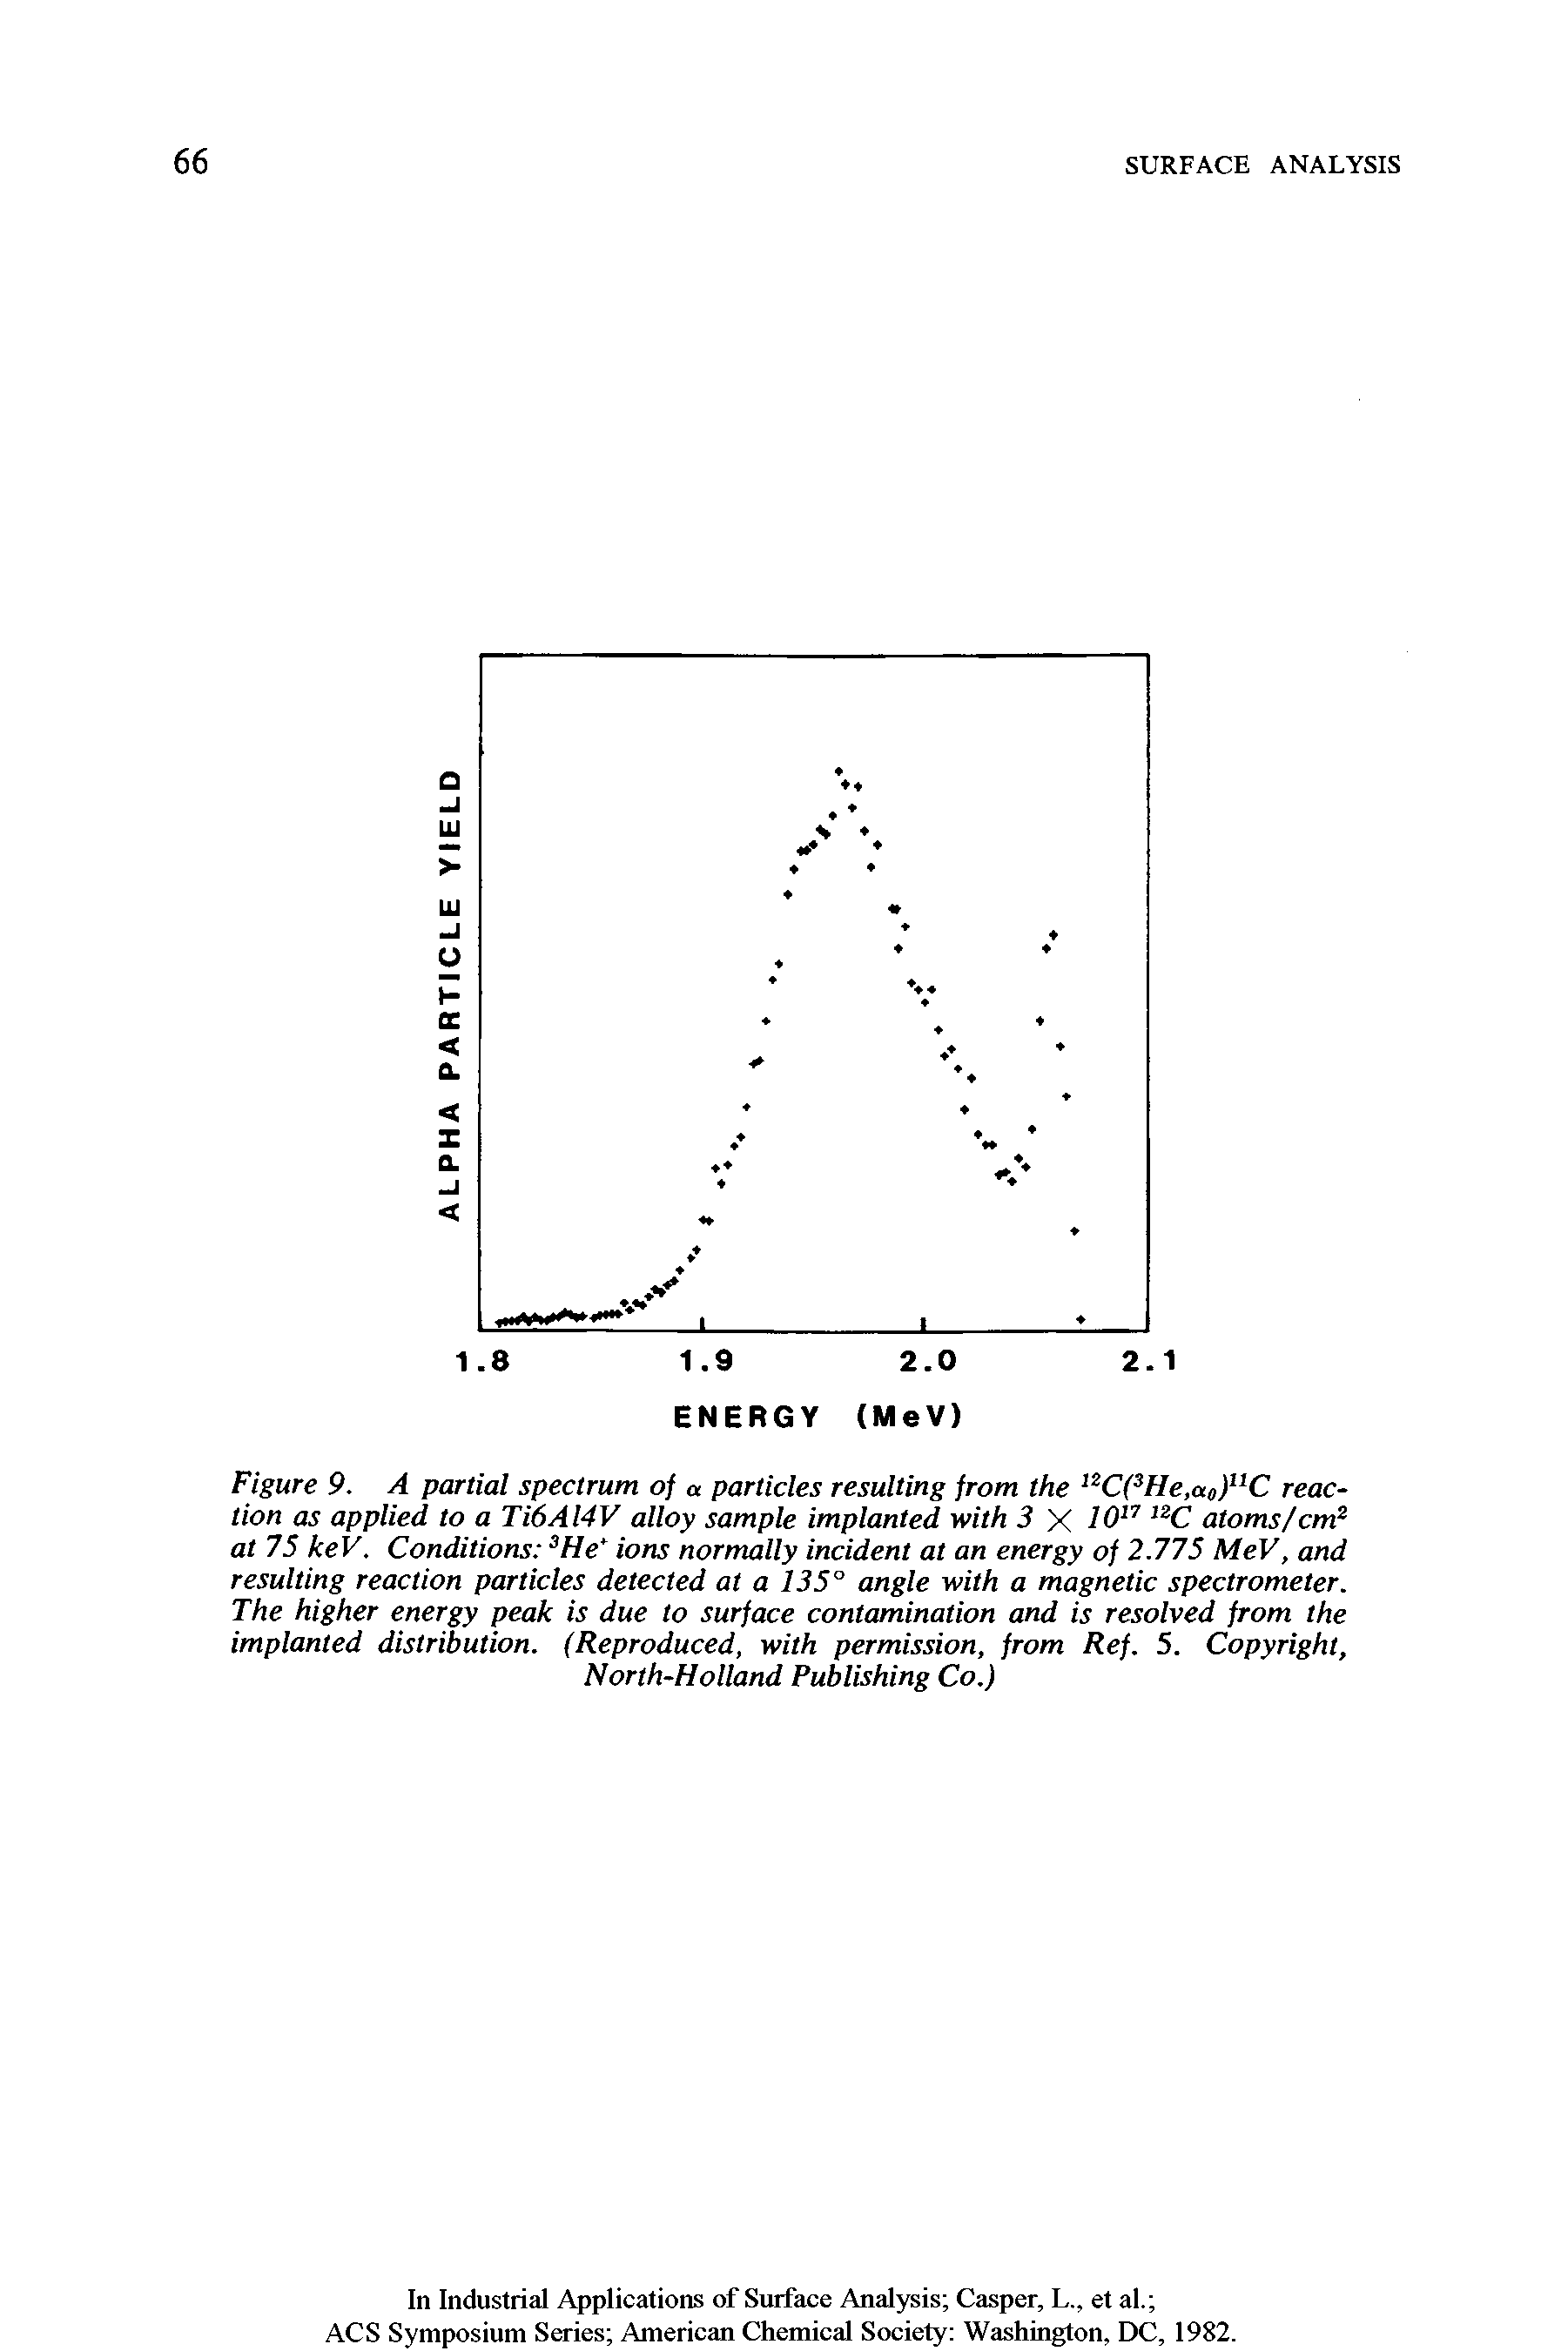 Figure 9. A partial spectrum of a particles resulting from the 12C(3He,a0)nC reaction as applied to a Ti6Al4V alloy sample implanted with 3 X 1017 I2C atoms/cm2 at 75 keV. Conditions 3He ions normally incident at an energy of 2.775 MeV, and resulting reaction particles detected at a 135° angle with a magnetic spectrometer. The higher energy peak is due to surface contamination and is resolved from the implanted distribution. (Reproduced, with permission, from Ref. 5. Copyright, North-Holland Publishing Co.)...